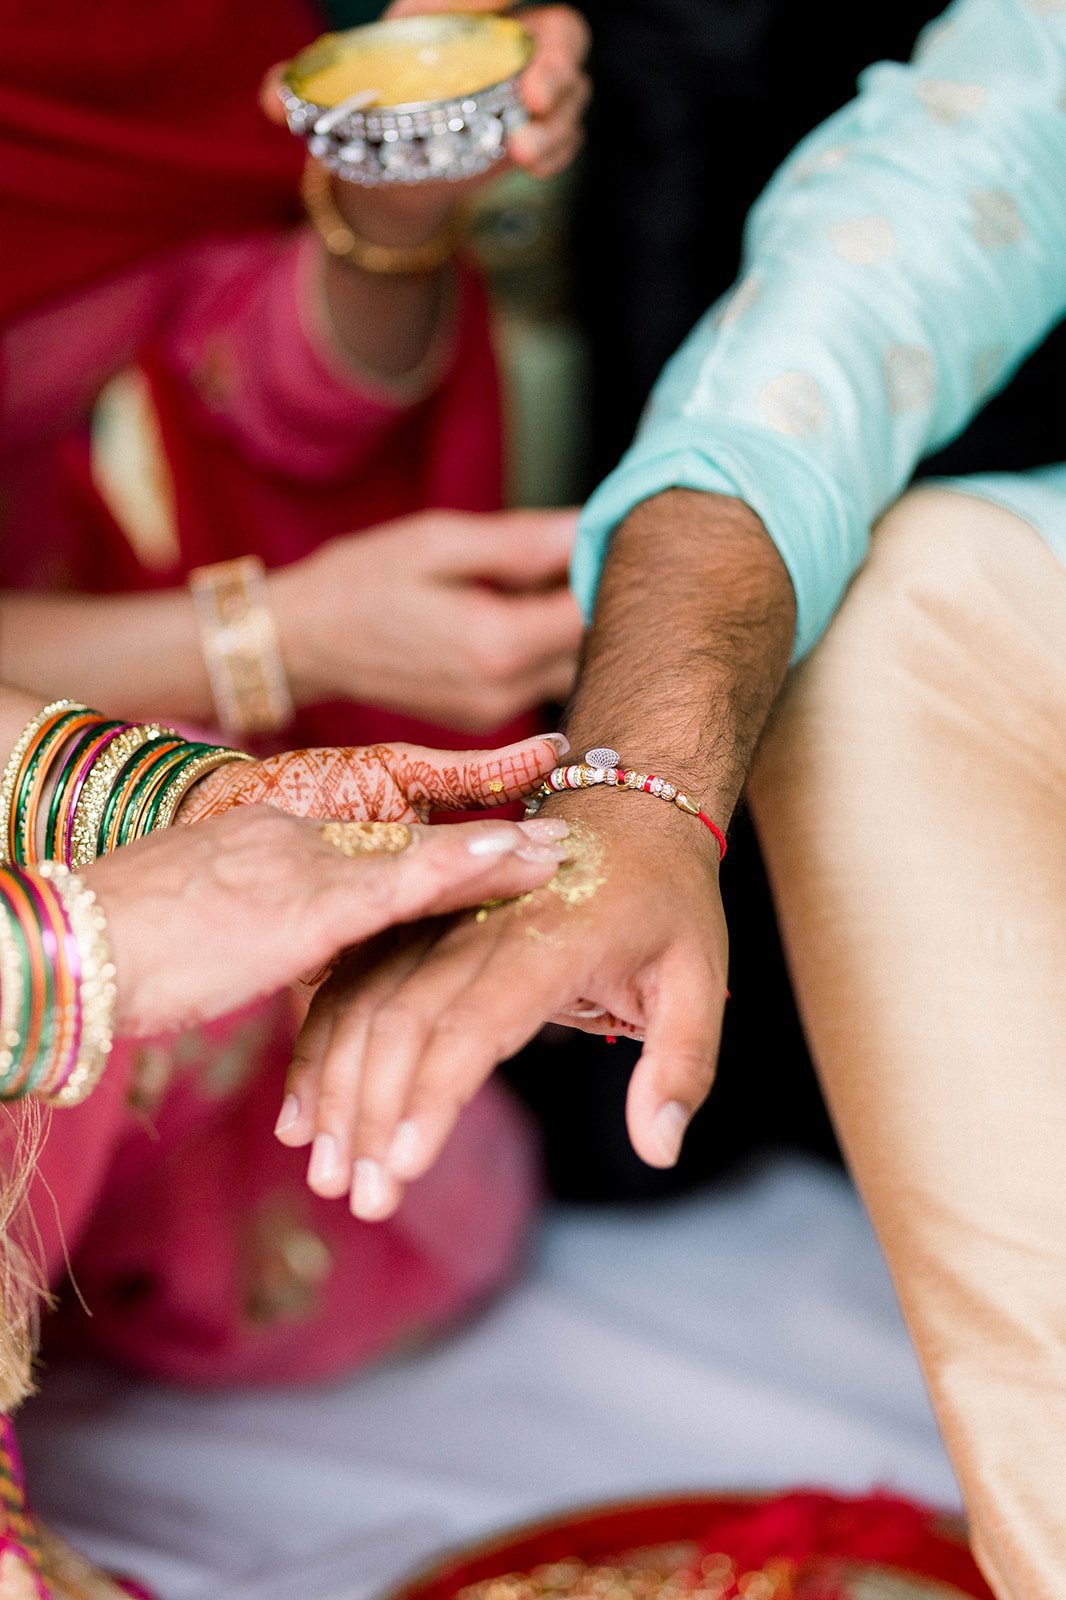 Yellow turmeric paste is smeared on grooms hand in south asian Indian wedding.